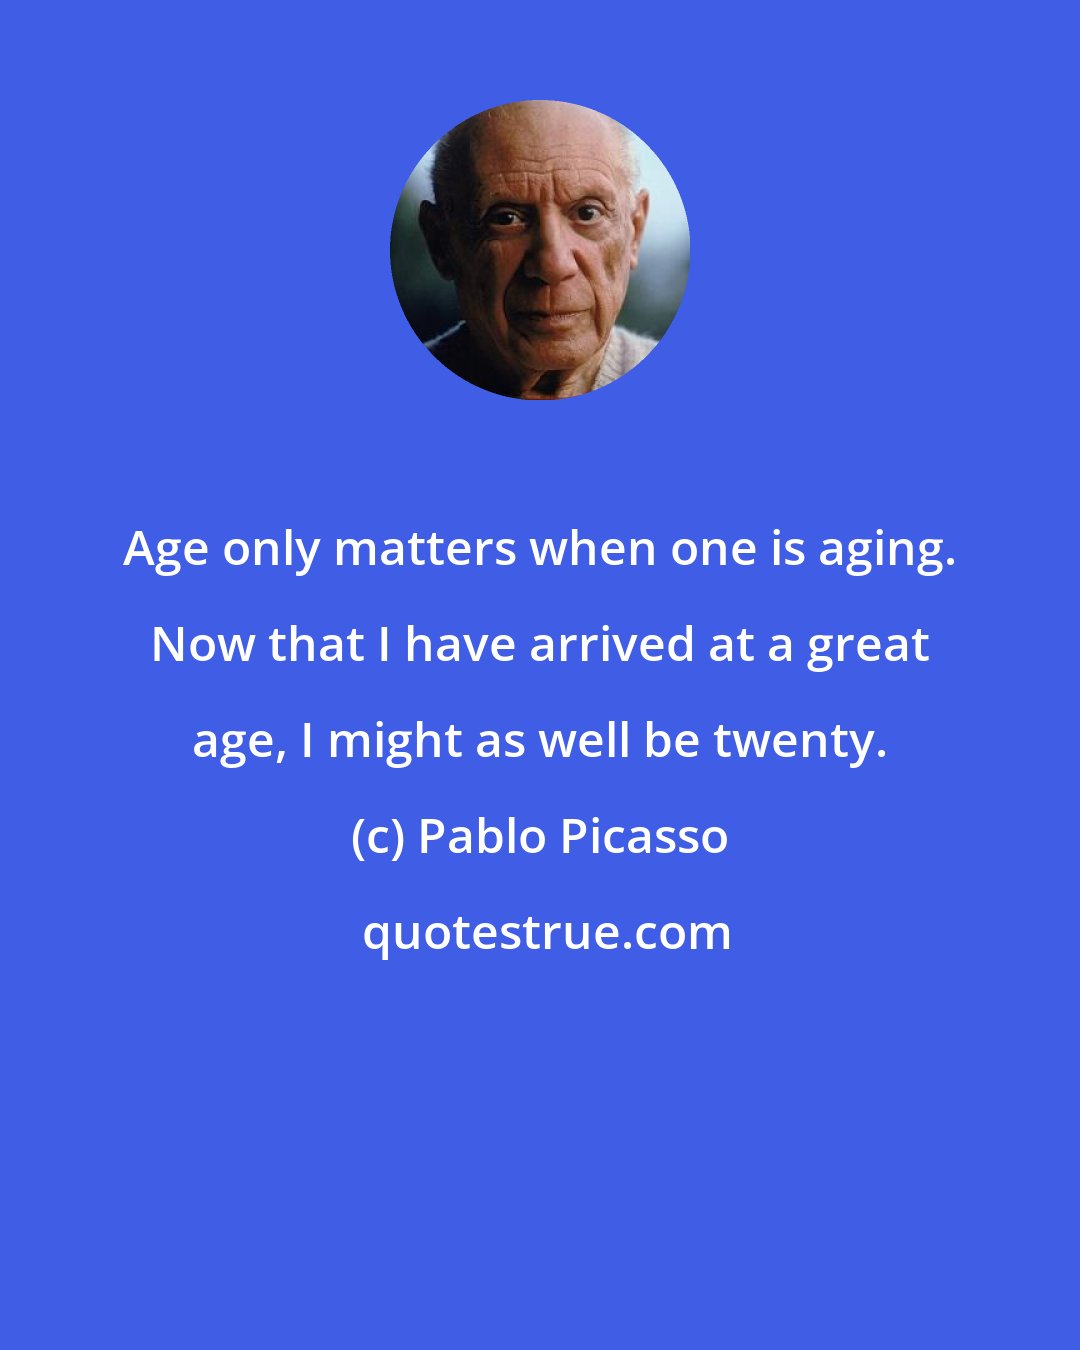 Pablo Picasso: Age only matters when one is aging. Now that I have arrived at a great age, I might as well be twenty.